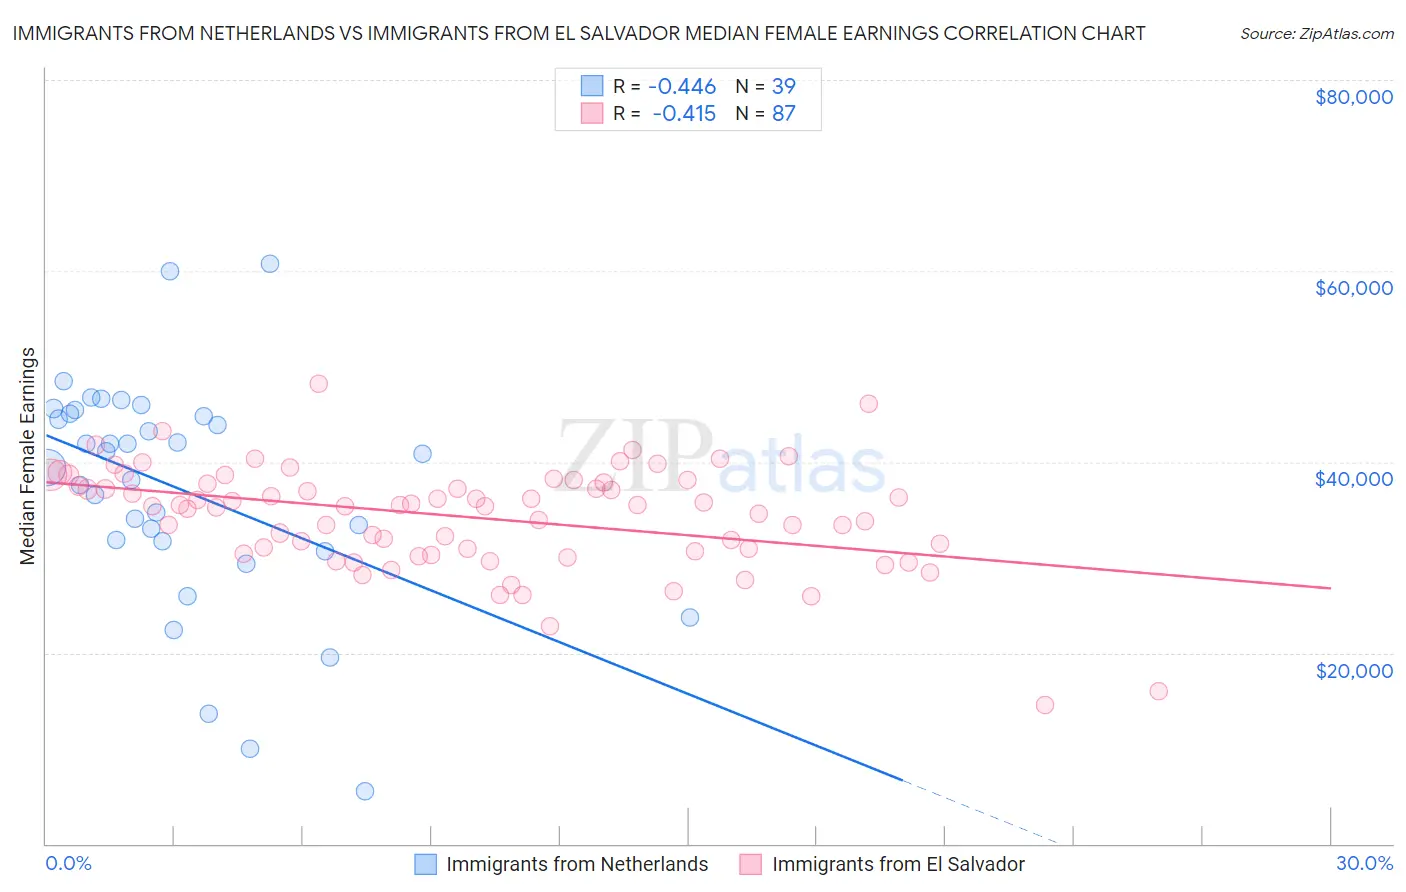 Immigrants from Netherlands vs Immigrants from El Salvador Median Female Earnings